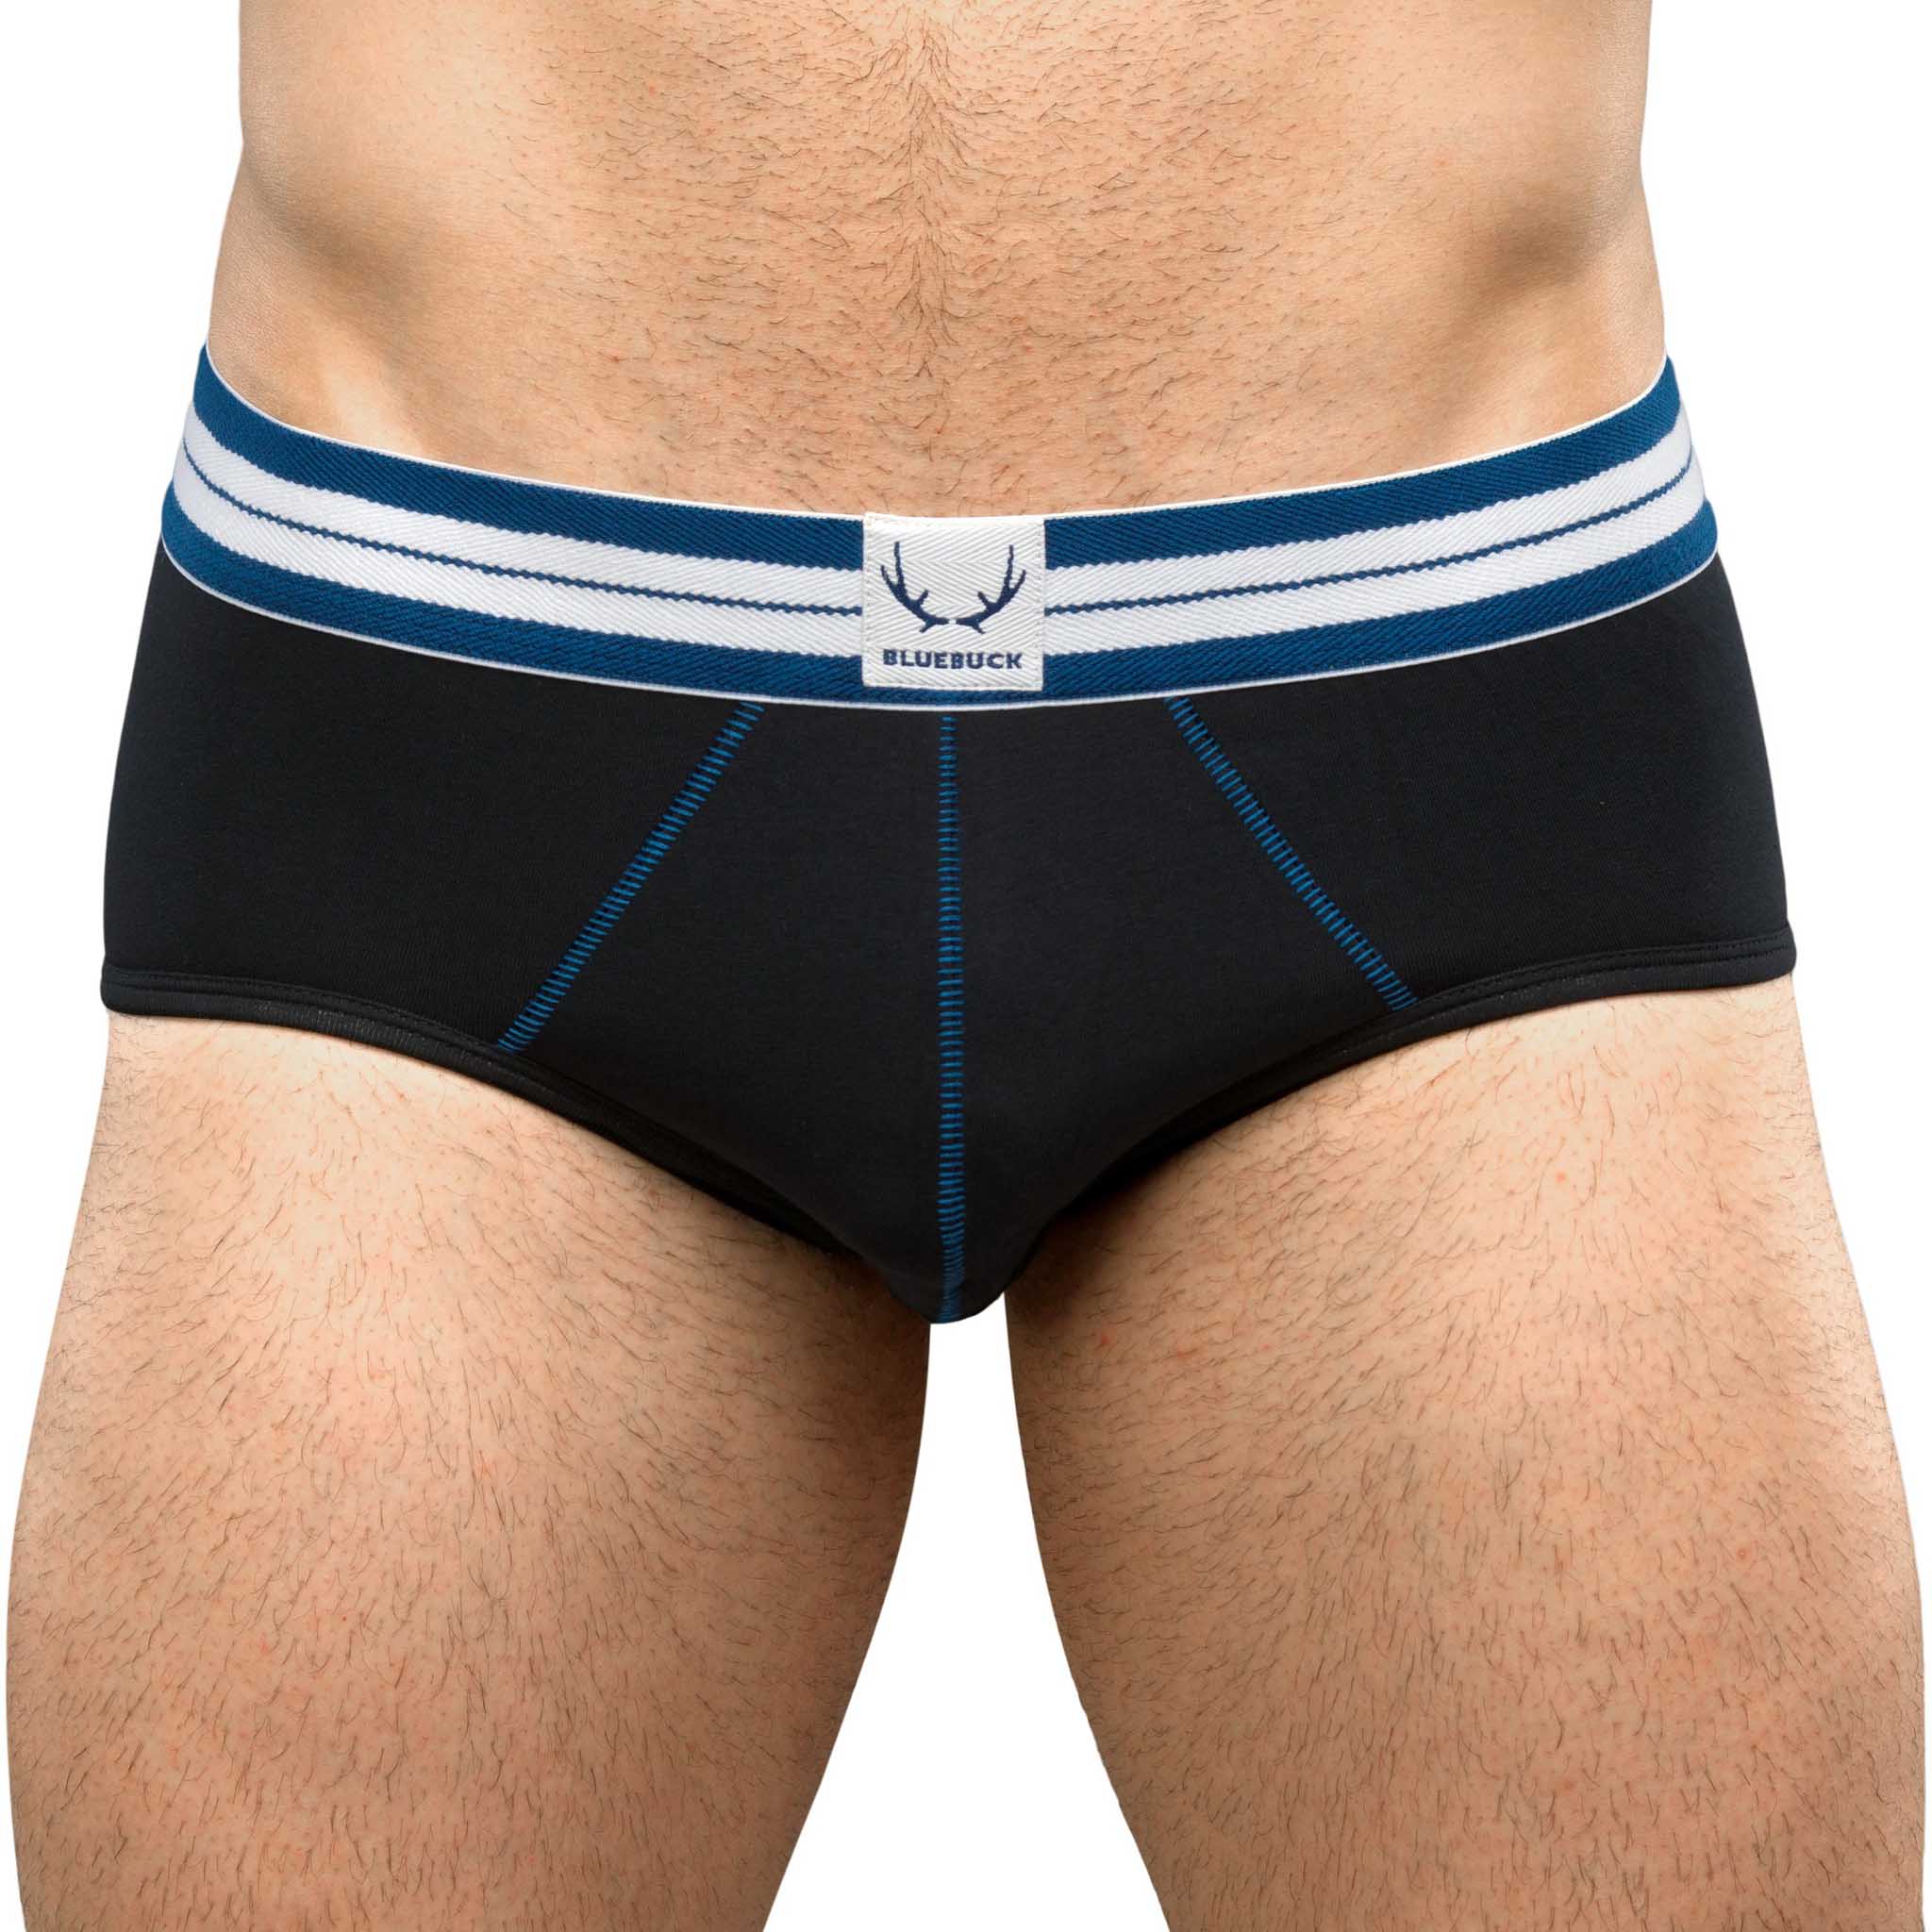 Black underpants made of organic cotton from Bluebuck